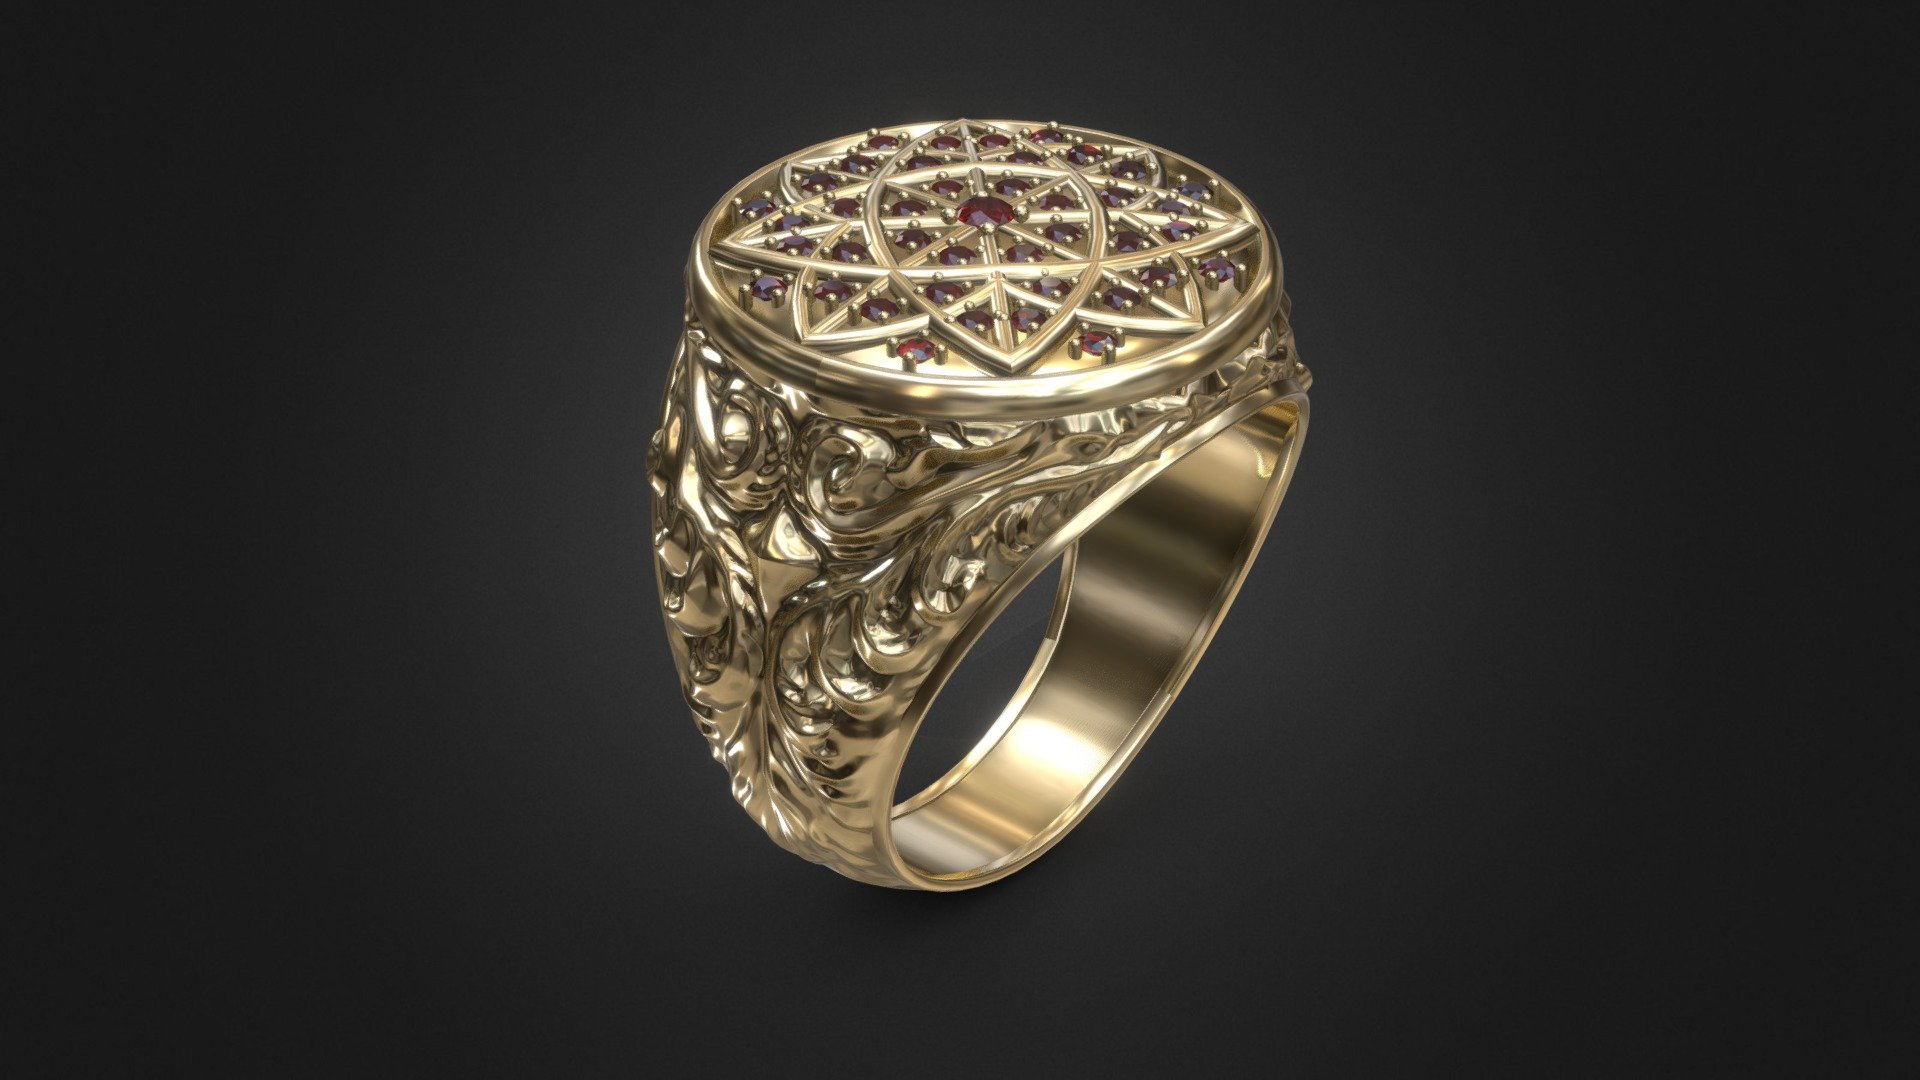 3D model, rosetta ring CAD model. This is a very popular design. Oversized piece. Please contact me if you have any doubts or would like to do modifications to this design. Modifications may be subject to extra cost depending on how much work is required. 
Please leave a message if you have any questions 3d model